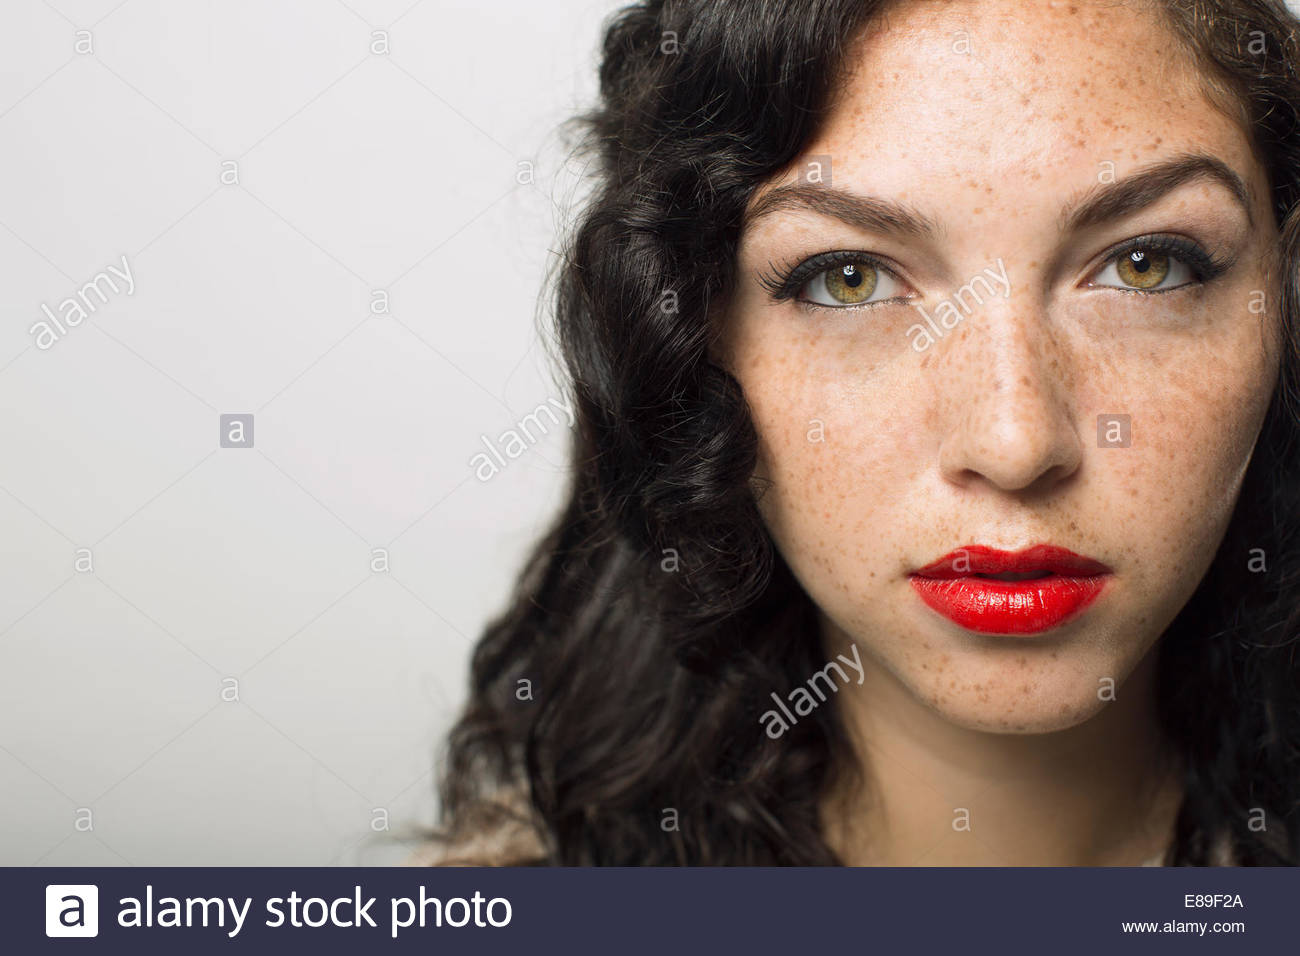 Close up portrait of serious woman with freckles Stock Photo